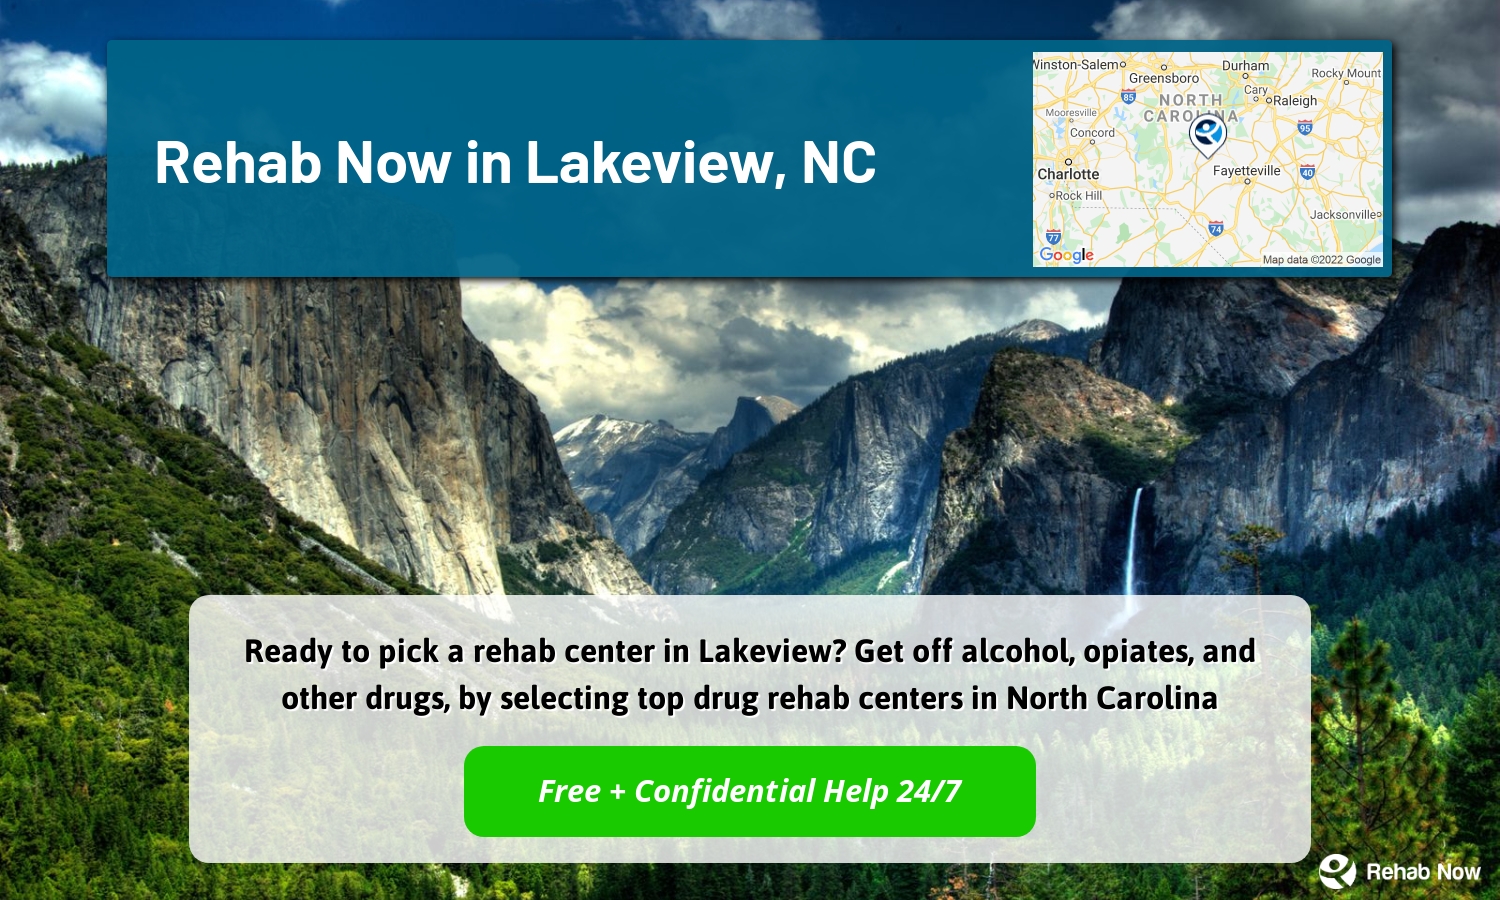 Ready to pick a rehab center in Lakeview? Get off alcohol, opiates, and other drugs, by selecting top drug rehab centers in North Carolina